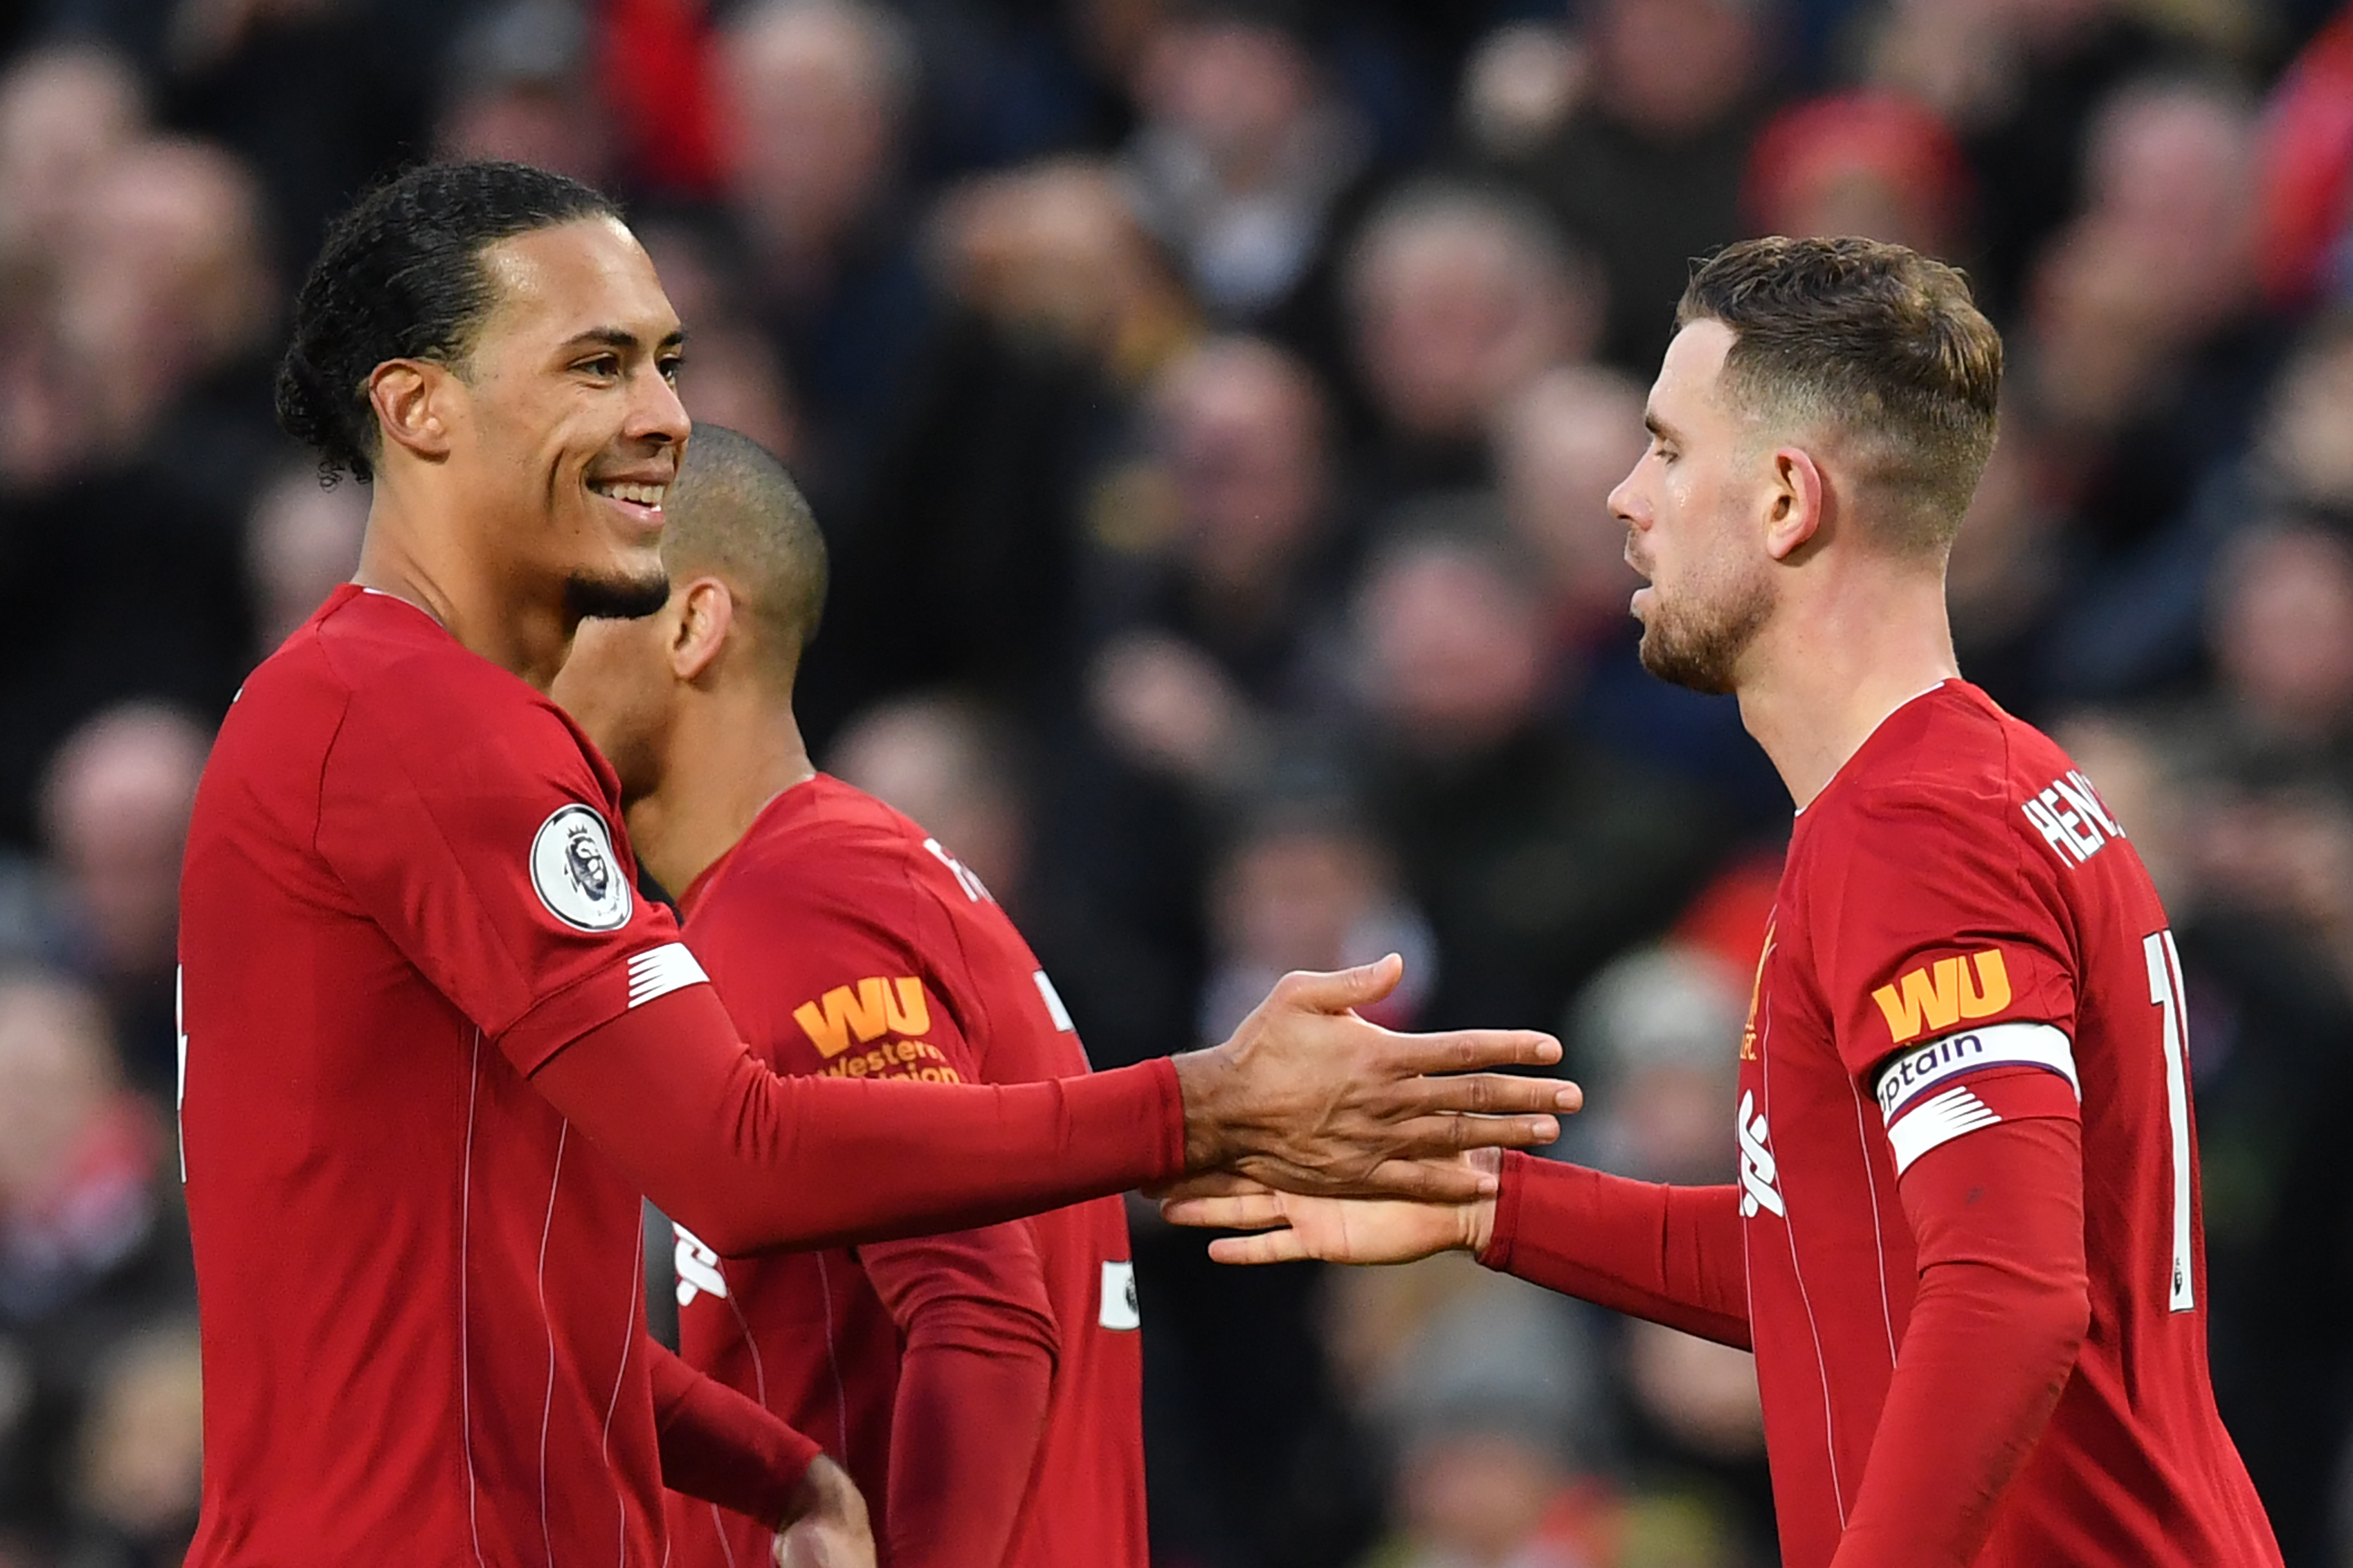 Virgil van Dijk and Jordan Henderson are two of several Liverpool players who miss out against Aston Villa. (Photo by Paul Ellis/AFP via Getty Images)